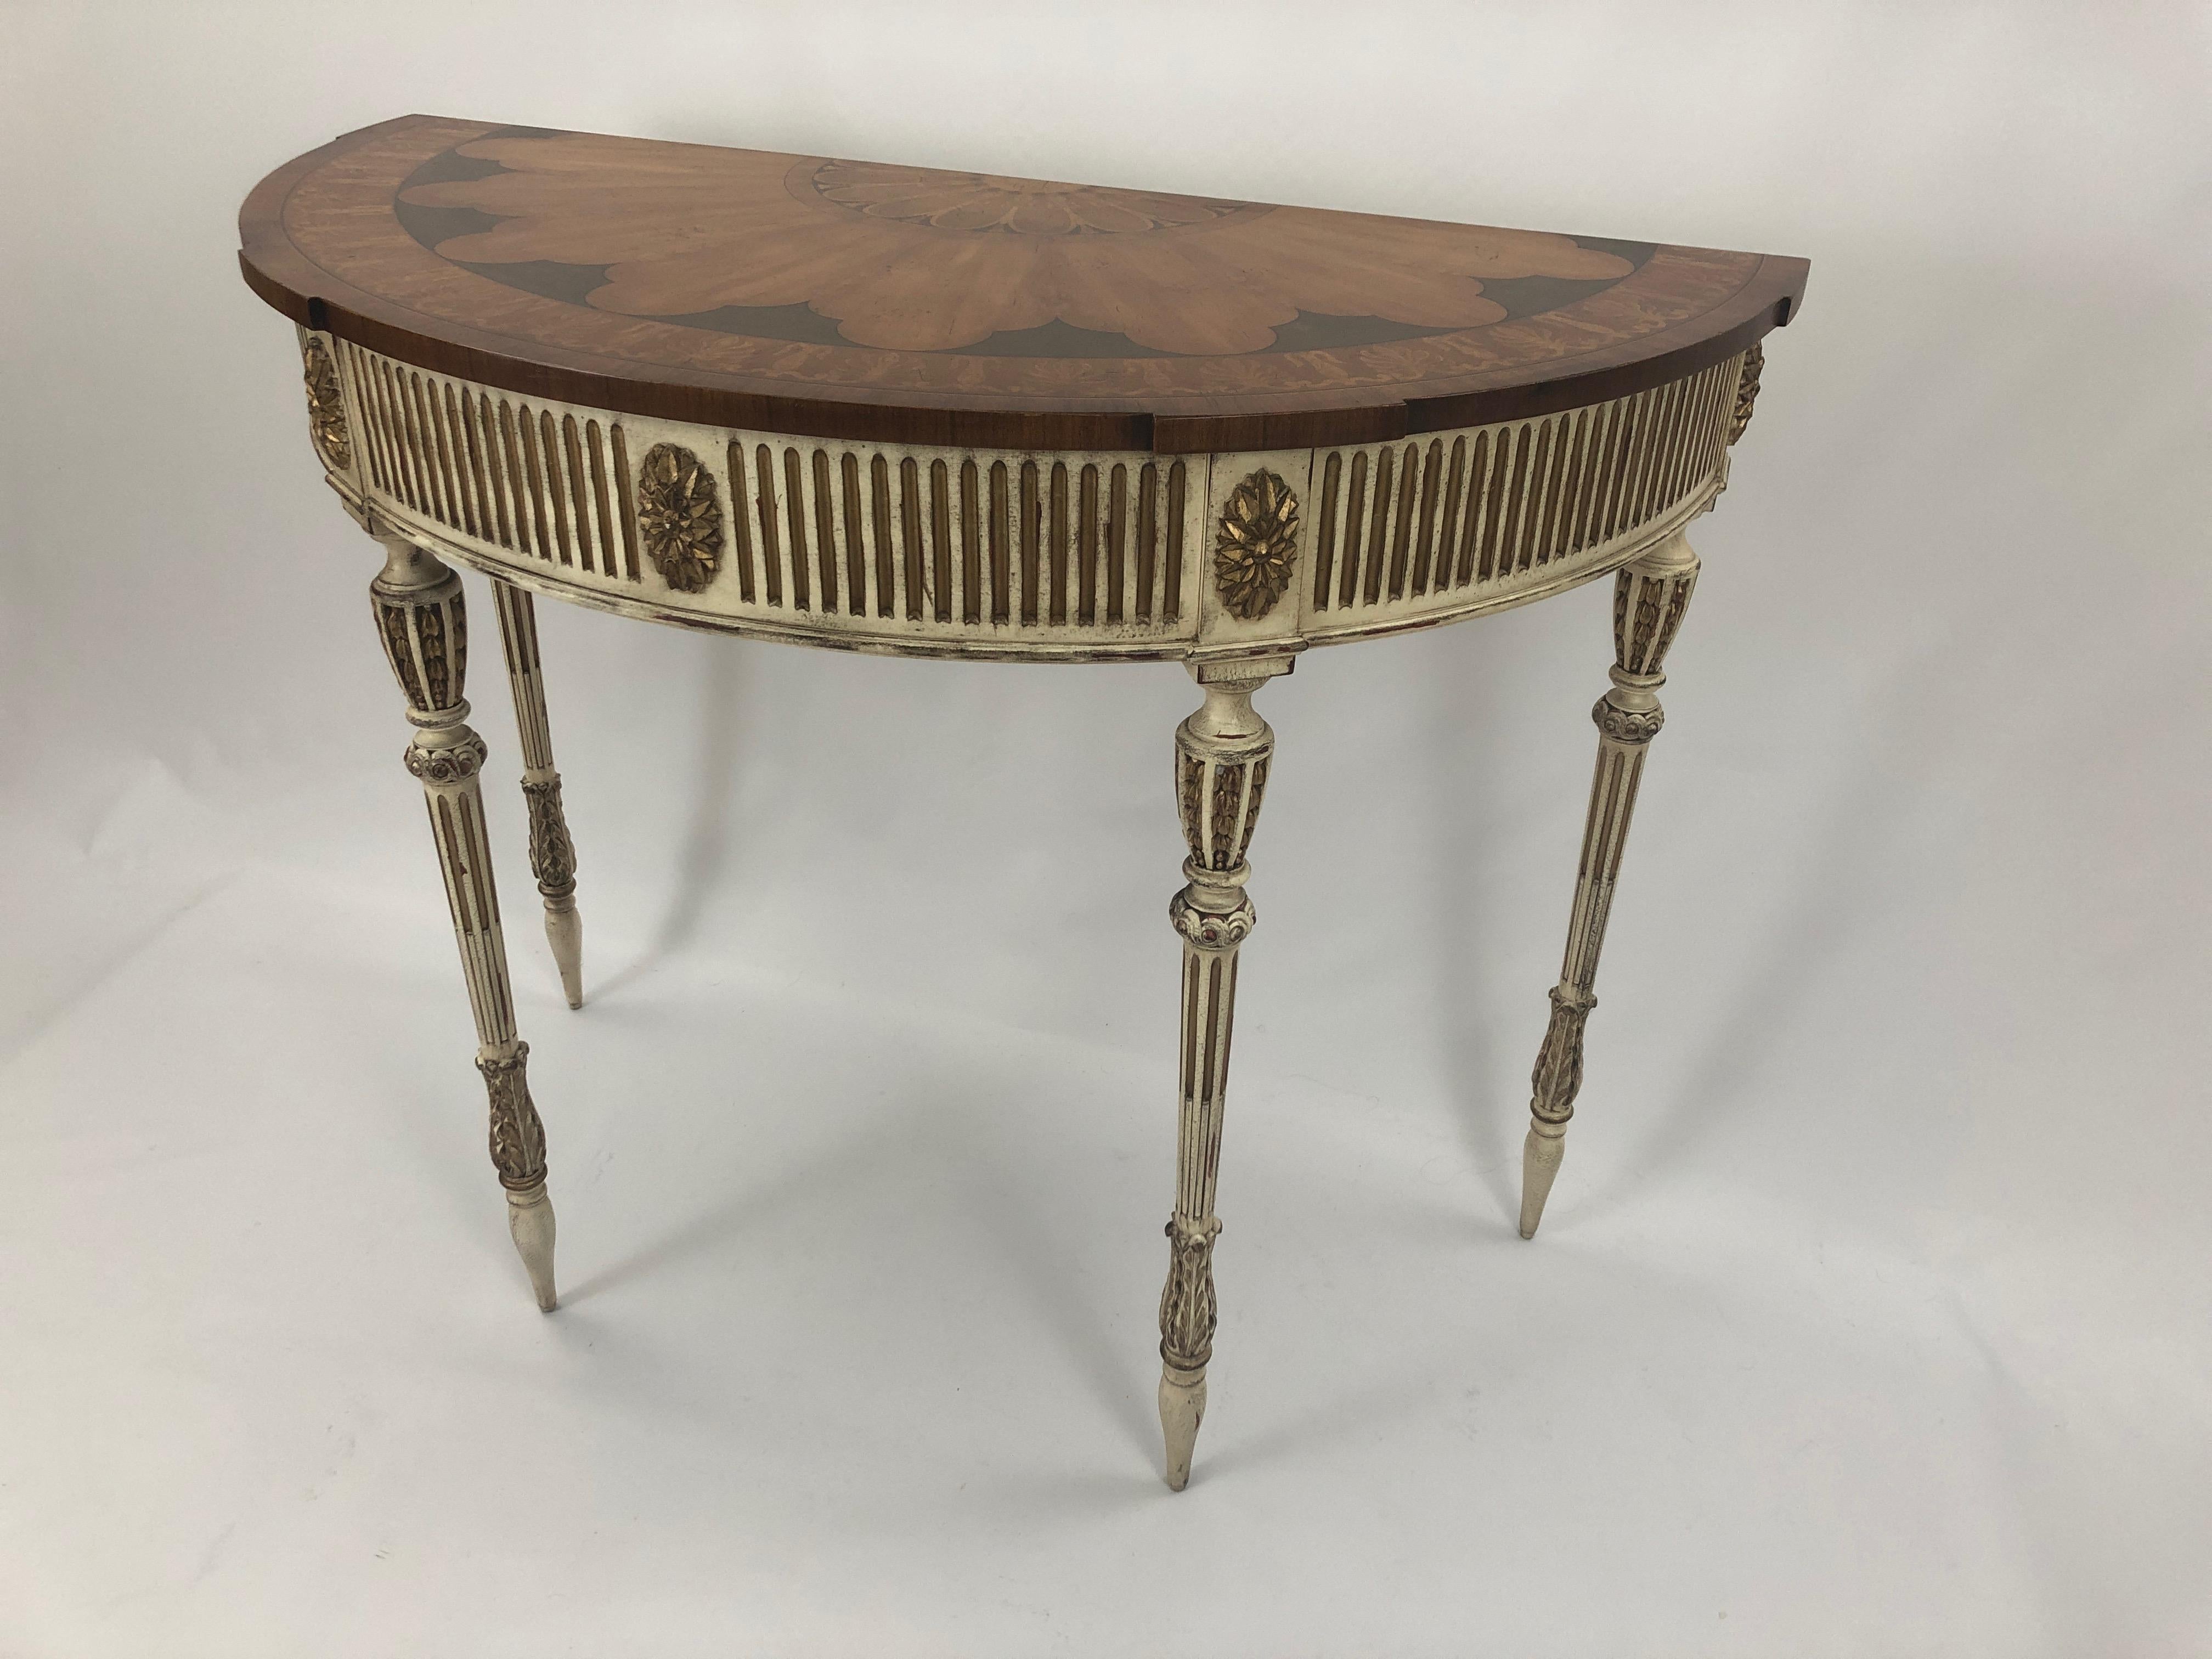 Sublimely Pretty Satinwood Inlay Painted and Gilded Demilune Console Table 2